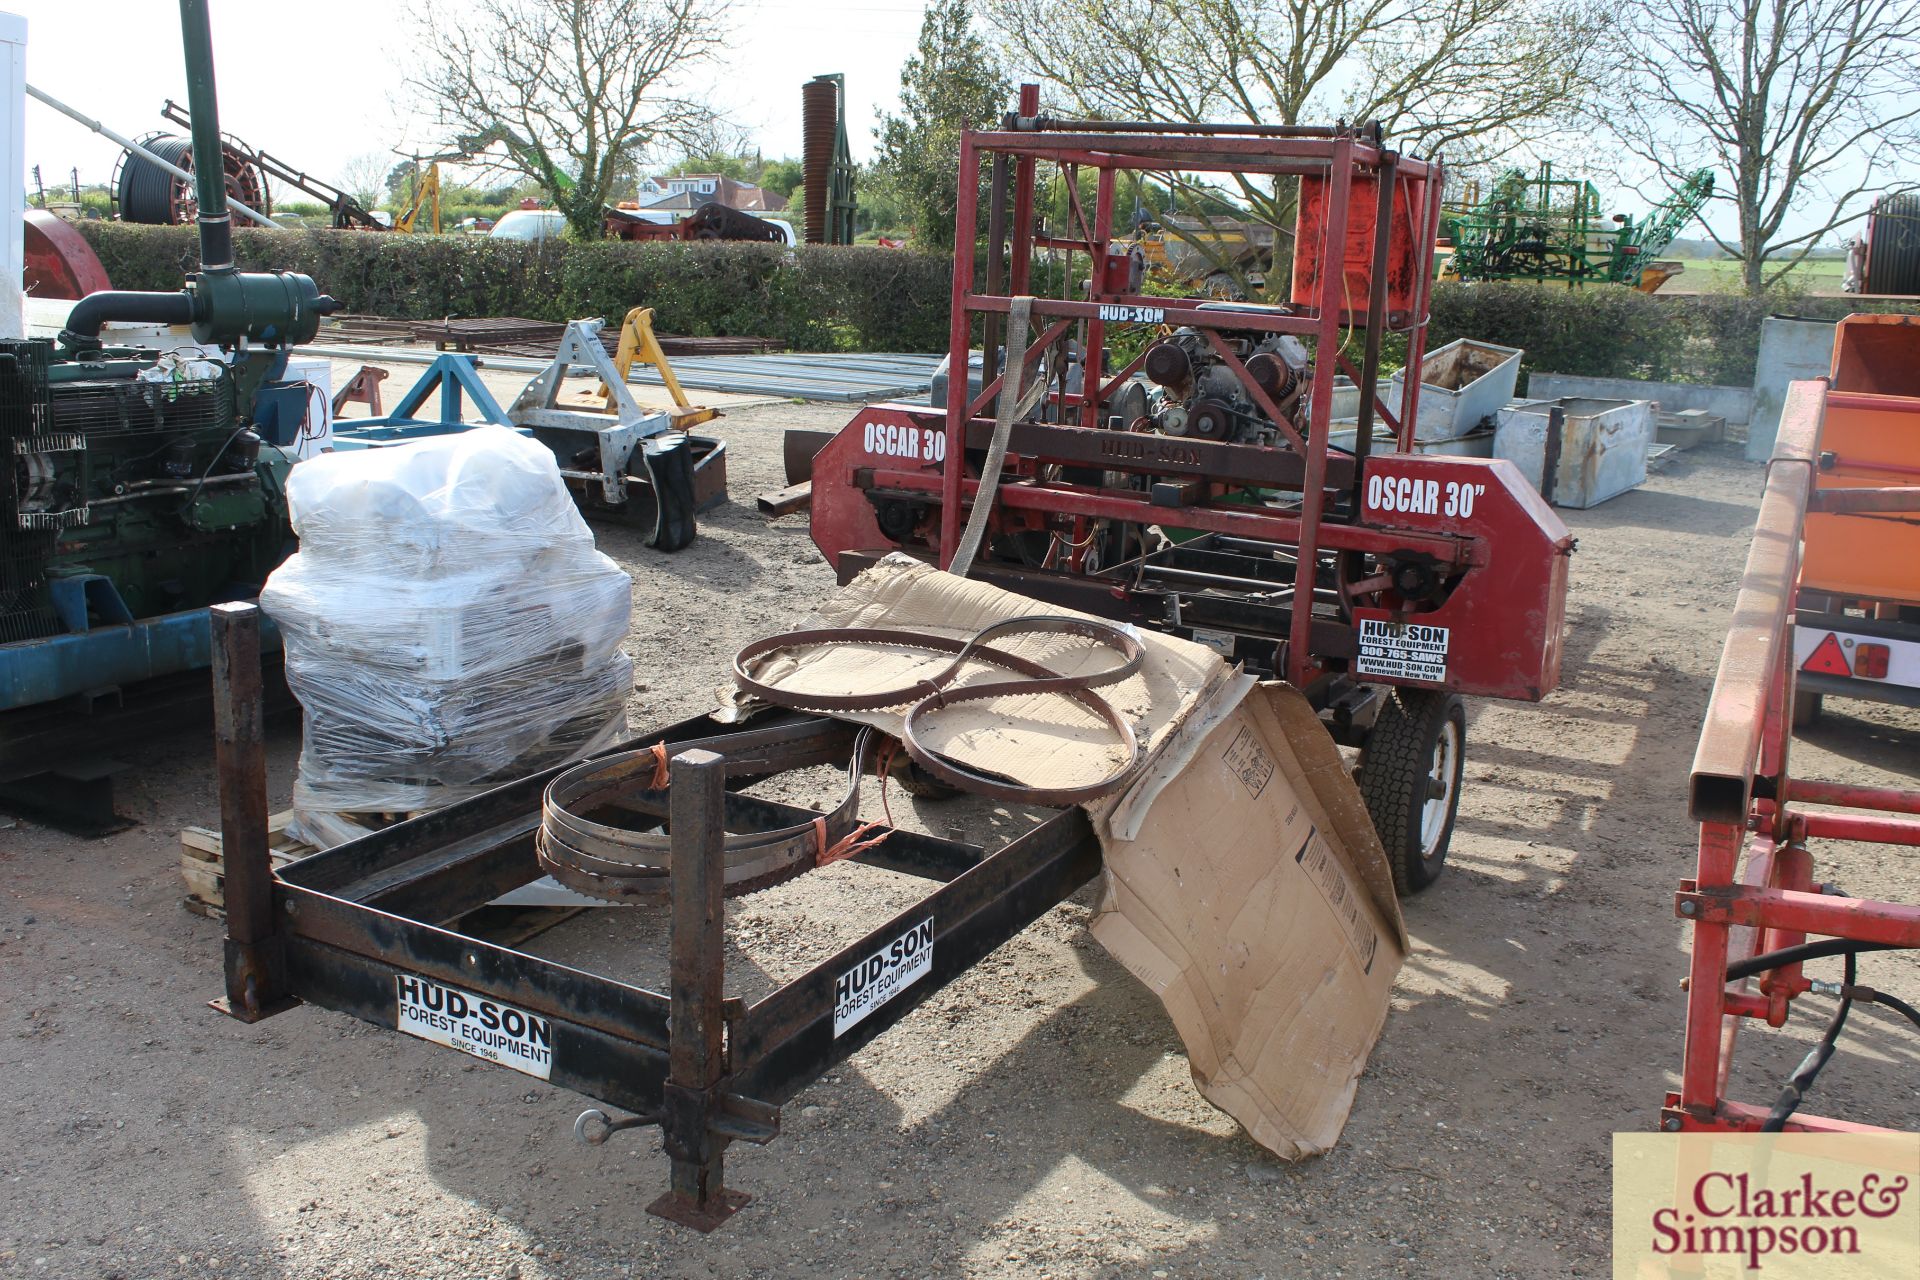 Hud-Son Oscar 30in portable trailer mounted saw mill. With Vanguard V-twin petrol engine. - Image 4 of 14